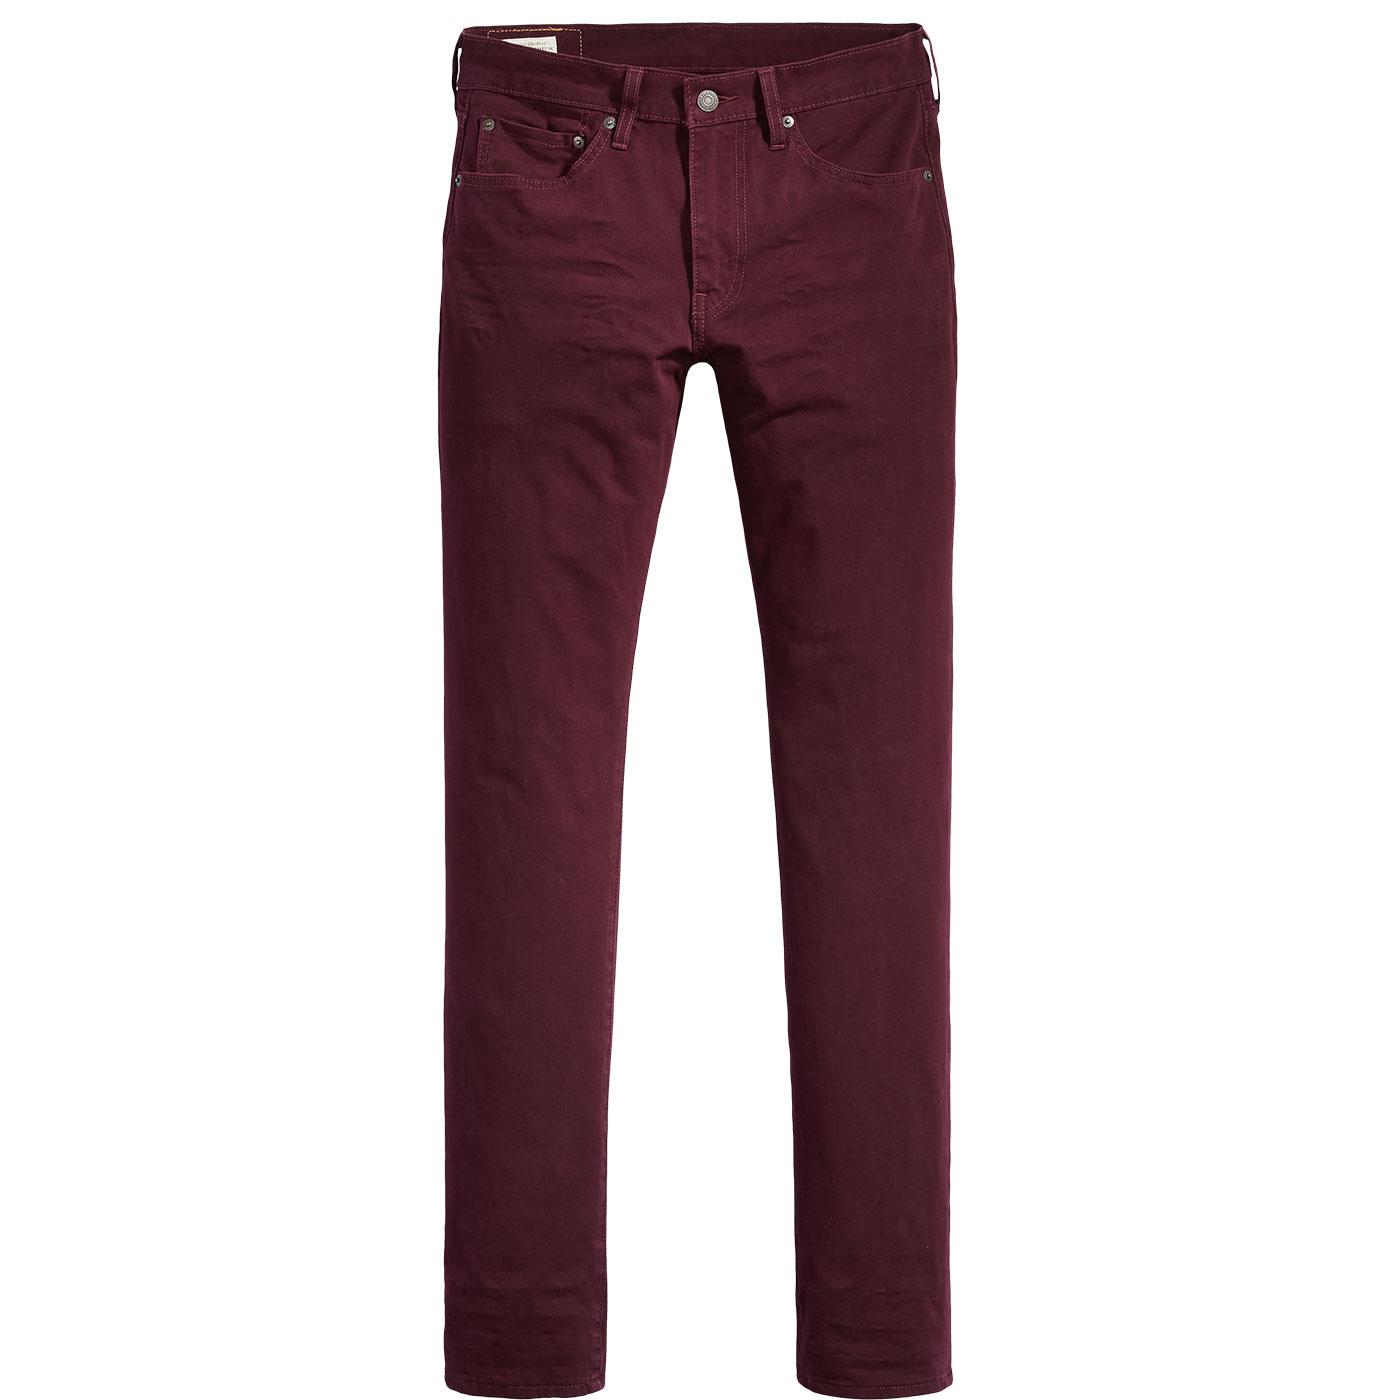 LEVI'S 511 Retro Mod Slim Fit Stretch Chinos in Mulled Wine